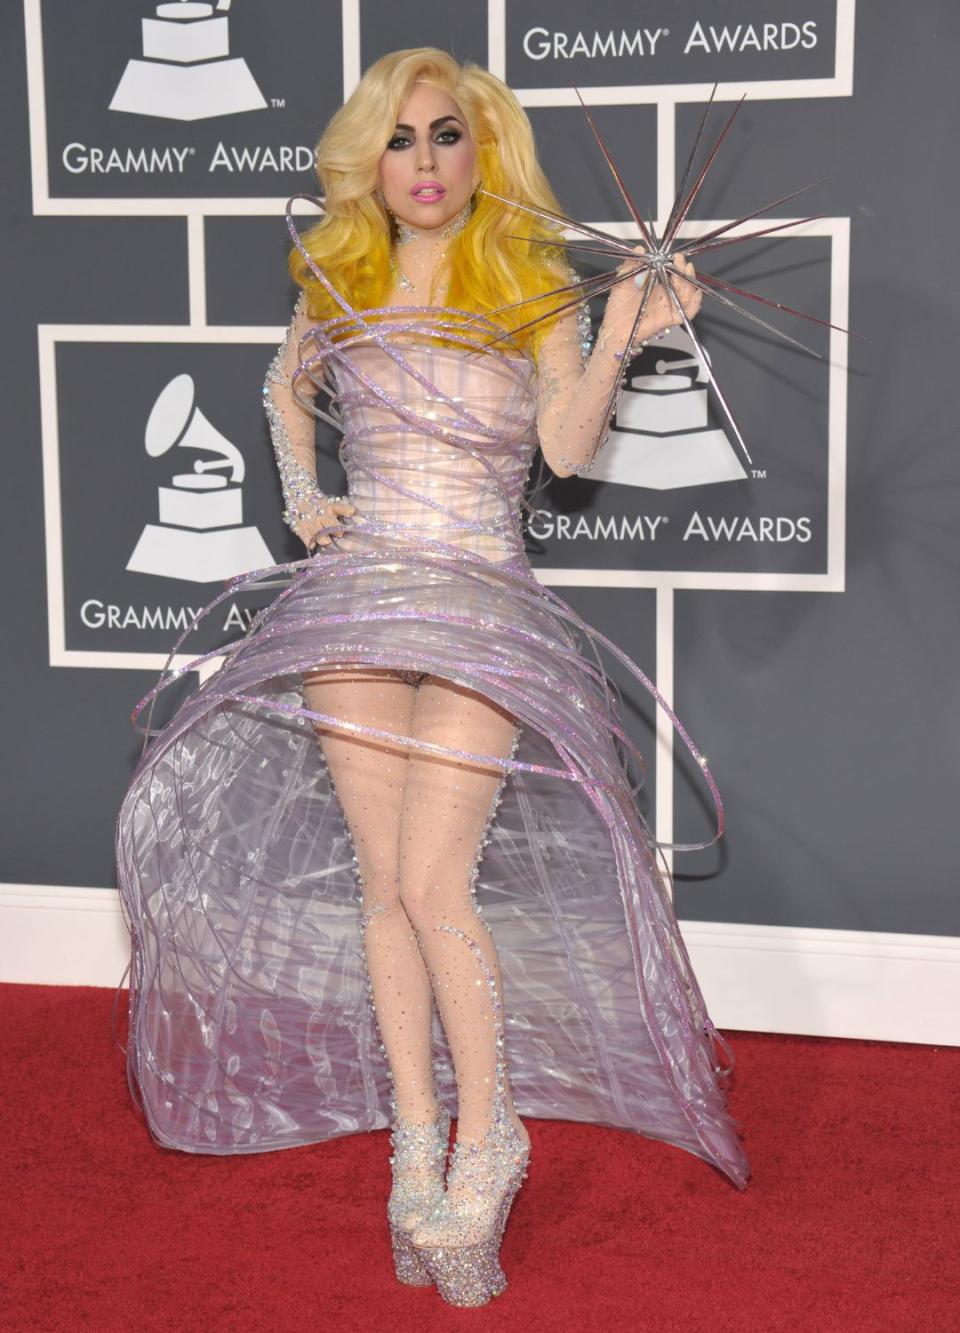 <p> Back in the day, there was no predicting what Lady Gaga would wear on the red carpet, so all of her looks - wild or tame - would come as a surprise. This galactic dress she wore to the 2010 Grammys could perhaps be considered one of her more tame looks, although this Giorgio Armani number certainly turned a lot of heads. It wasn't just the dress though - her gravity-defying shoes and very spiky prop sealed this look as one for the history books. </p>